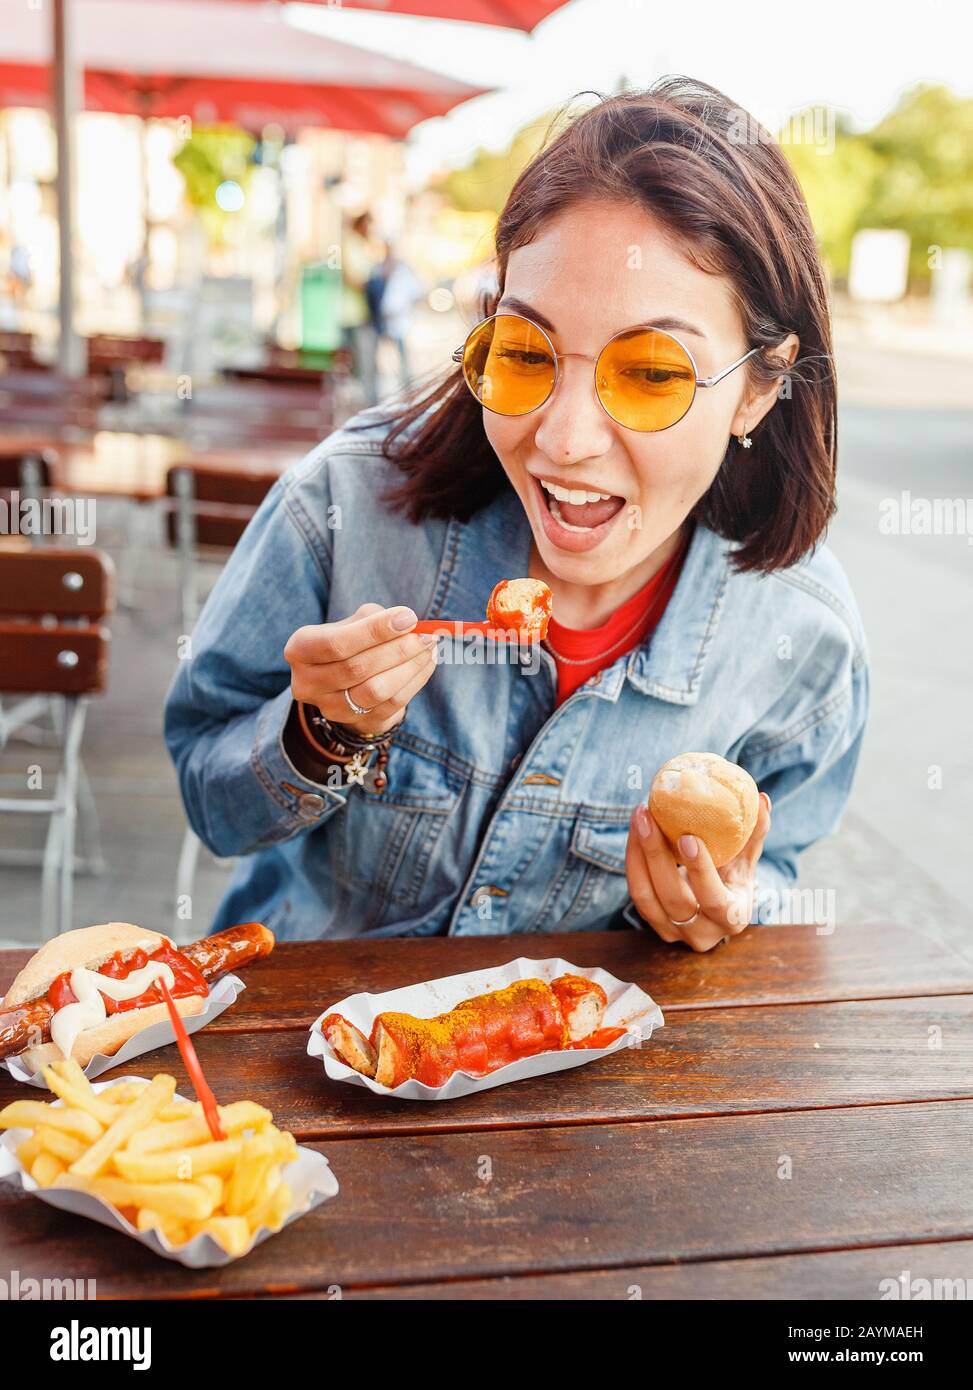 Woman eating Currywurst fast food German sausage in outdoor street food cafe Stock Photo